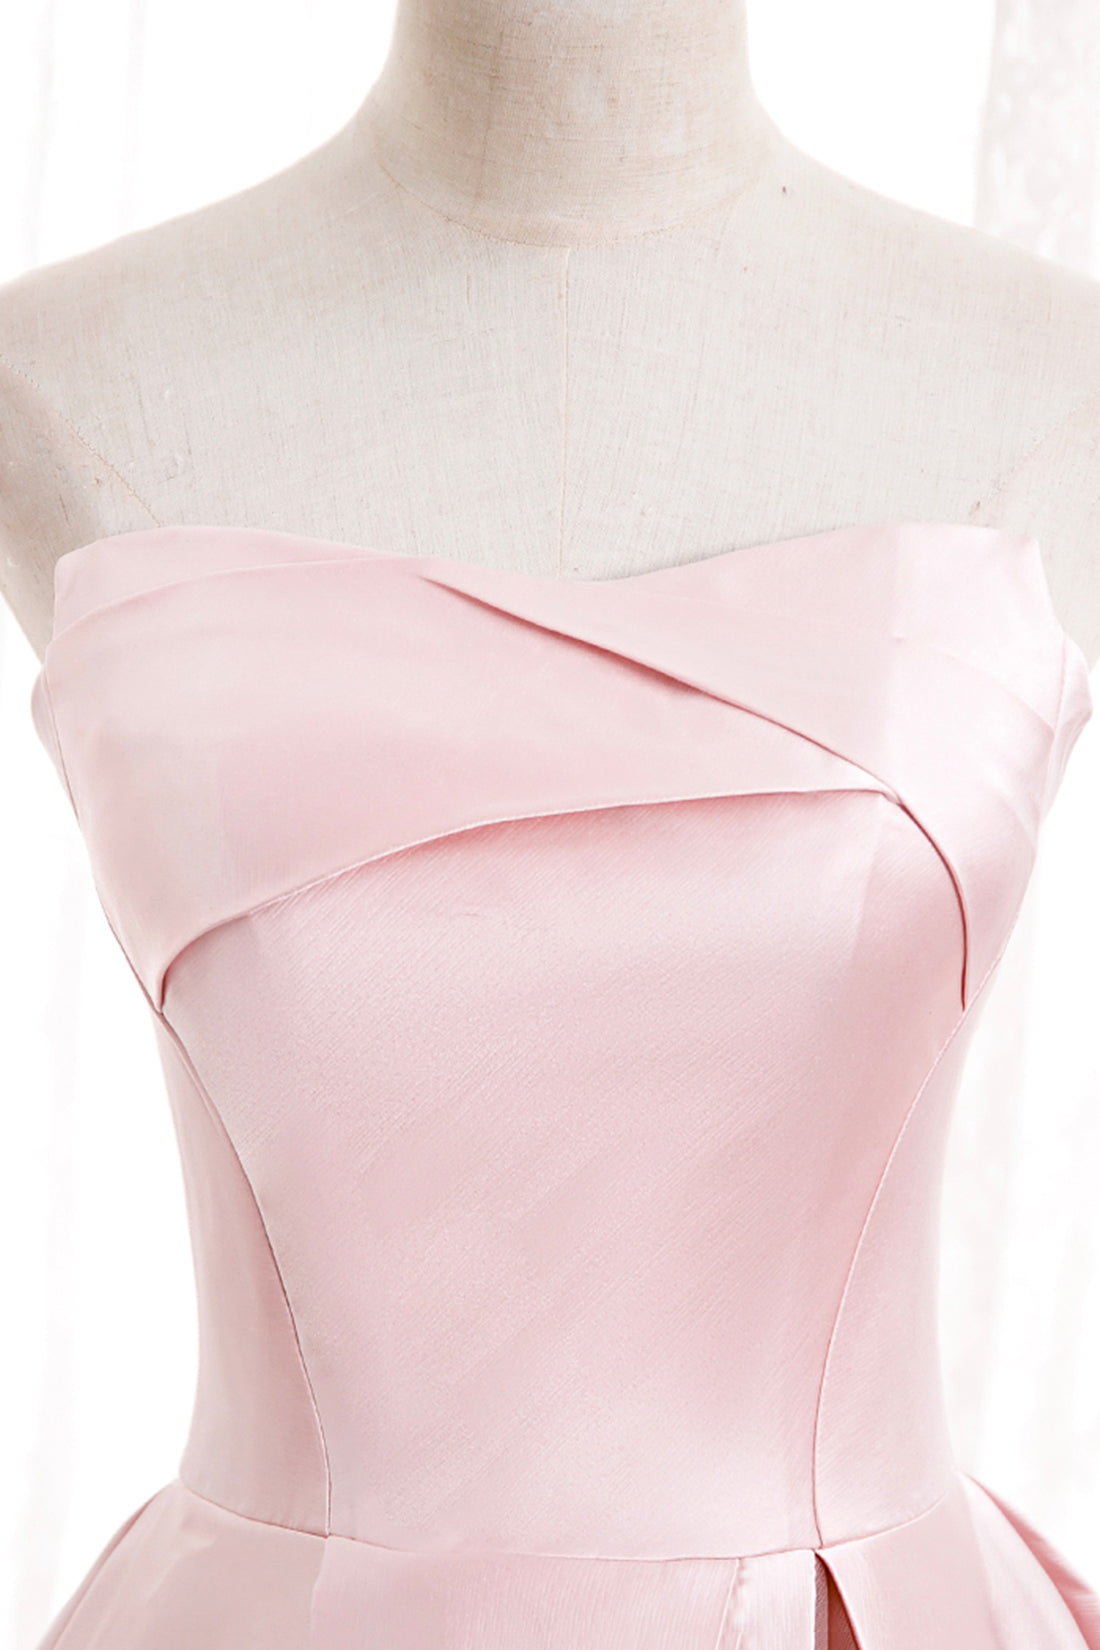 Pink Satin Long Prom Dress with Pearls, Pink Strapless Evening Dress